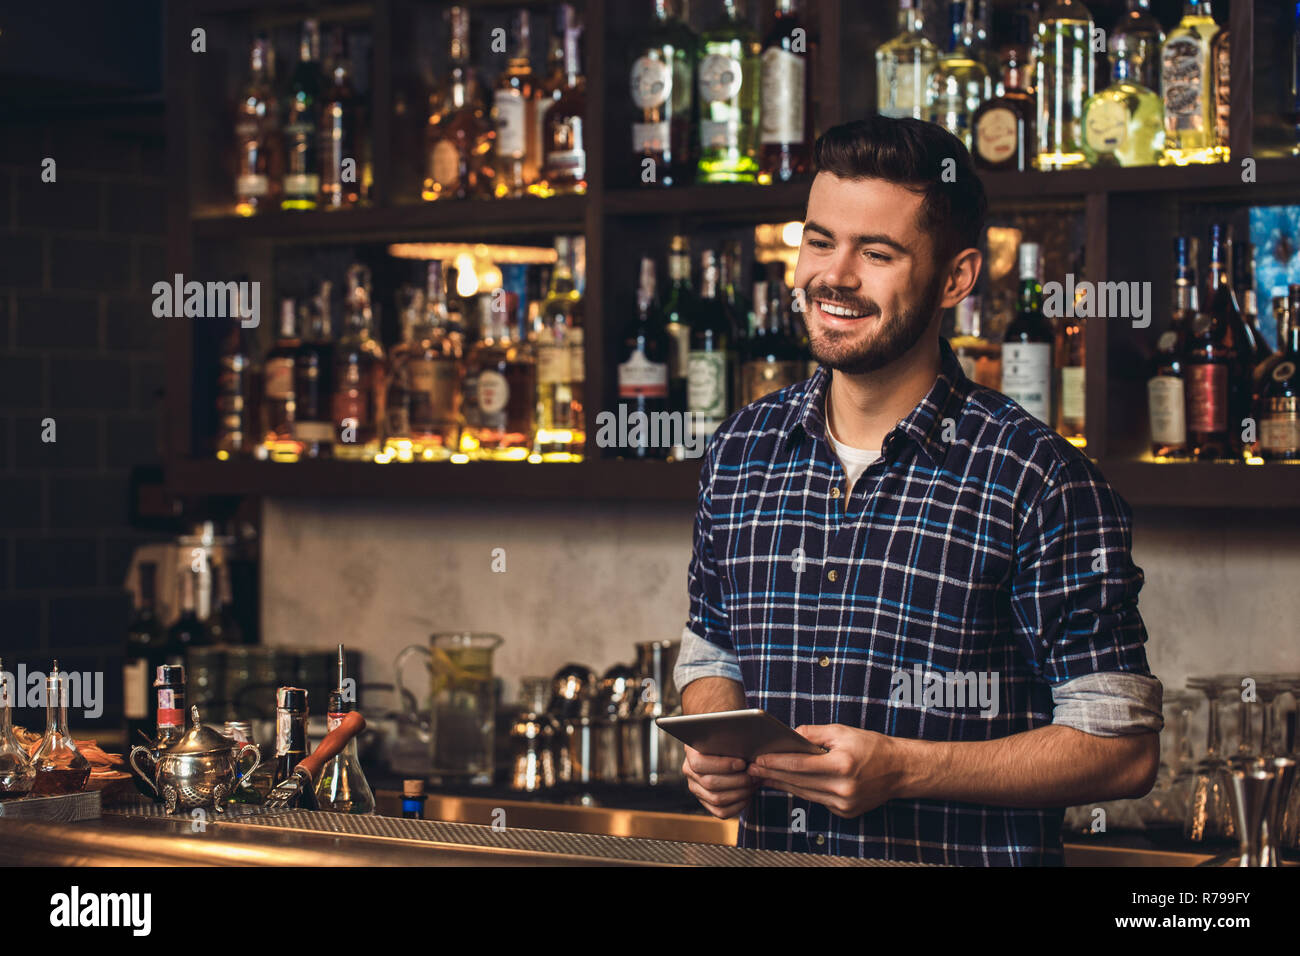 Young bartender standing at bar counter holding digital tablet laughing joyful Stock Photo